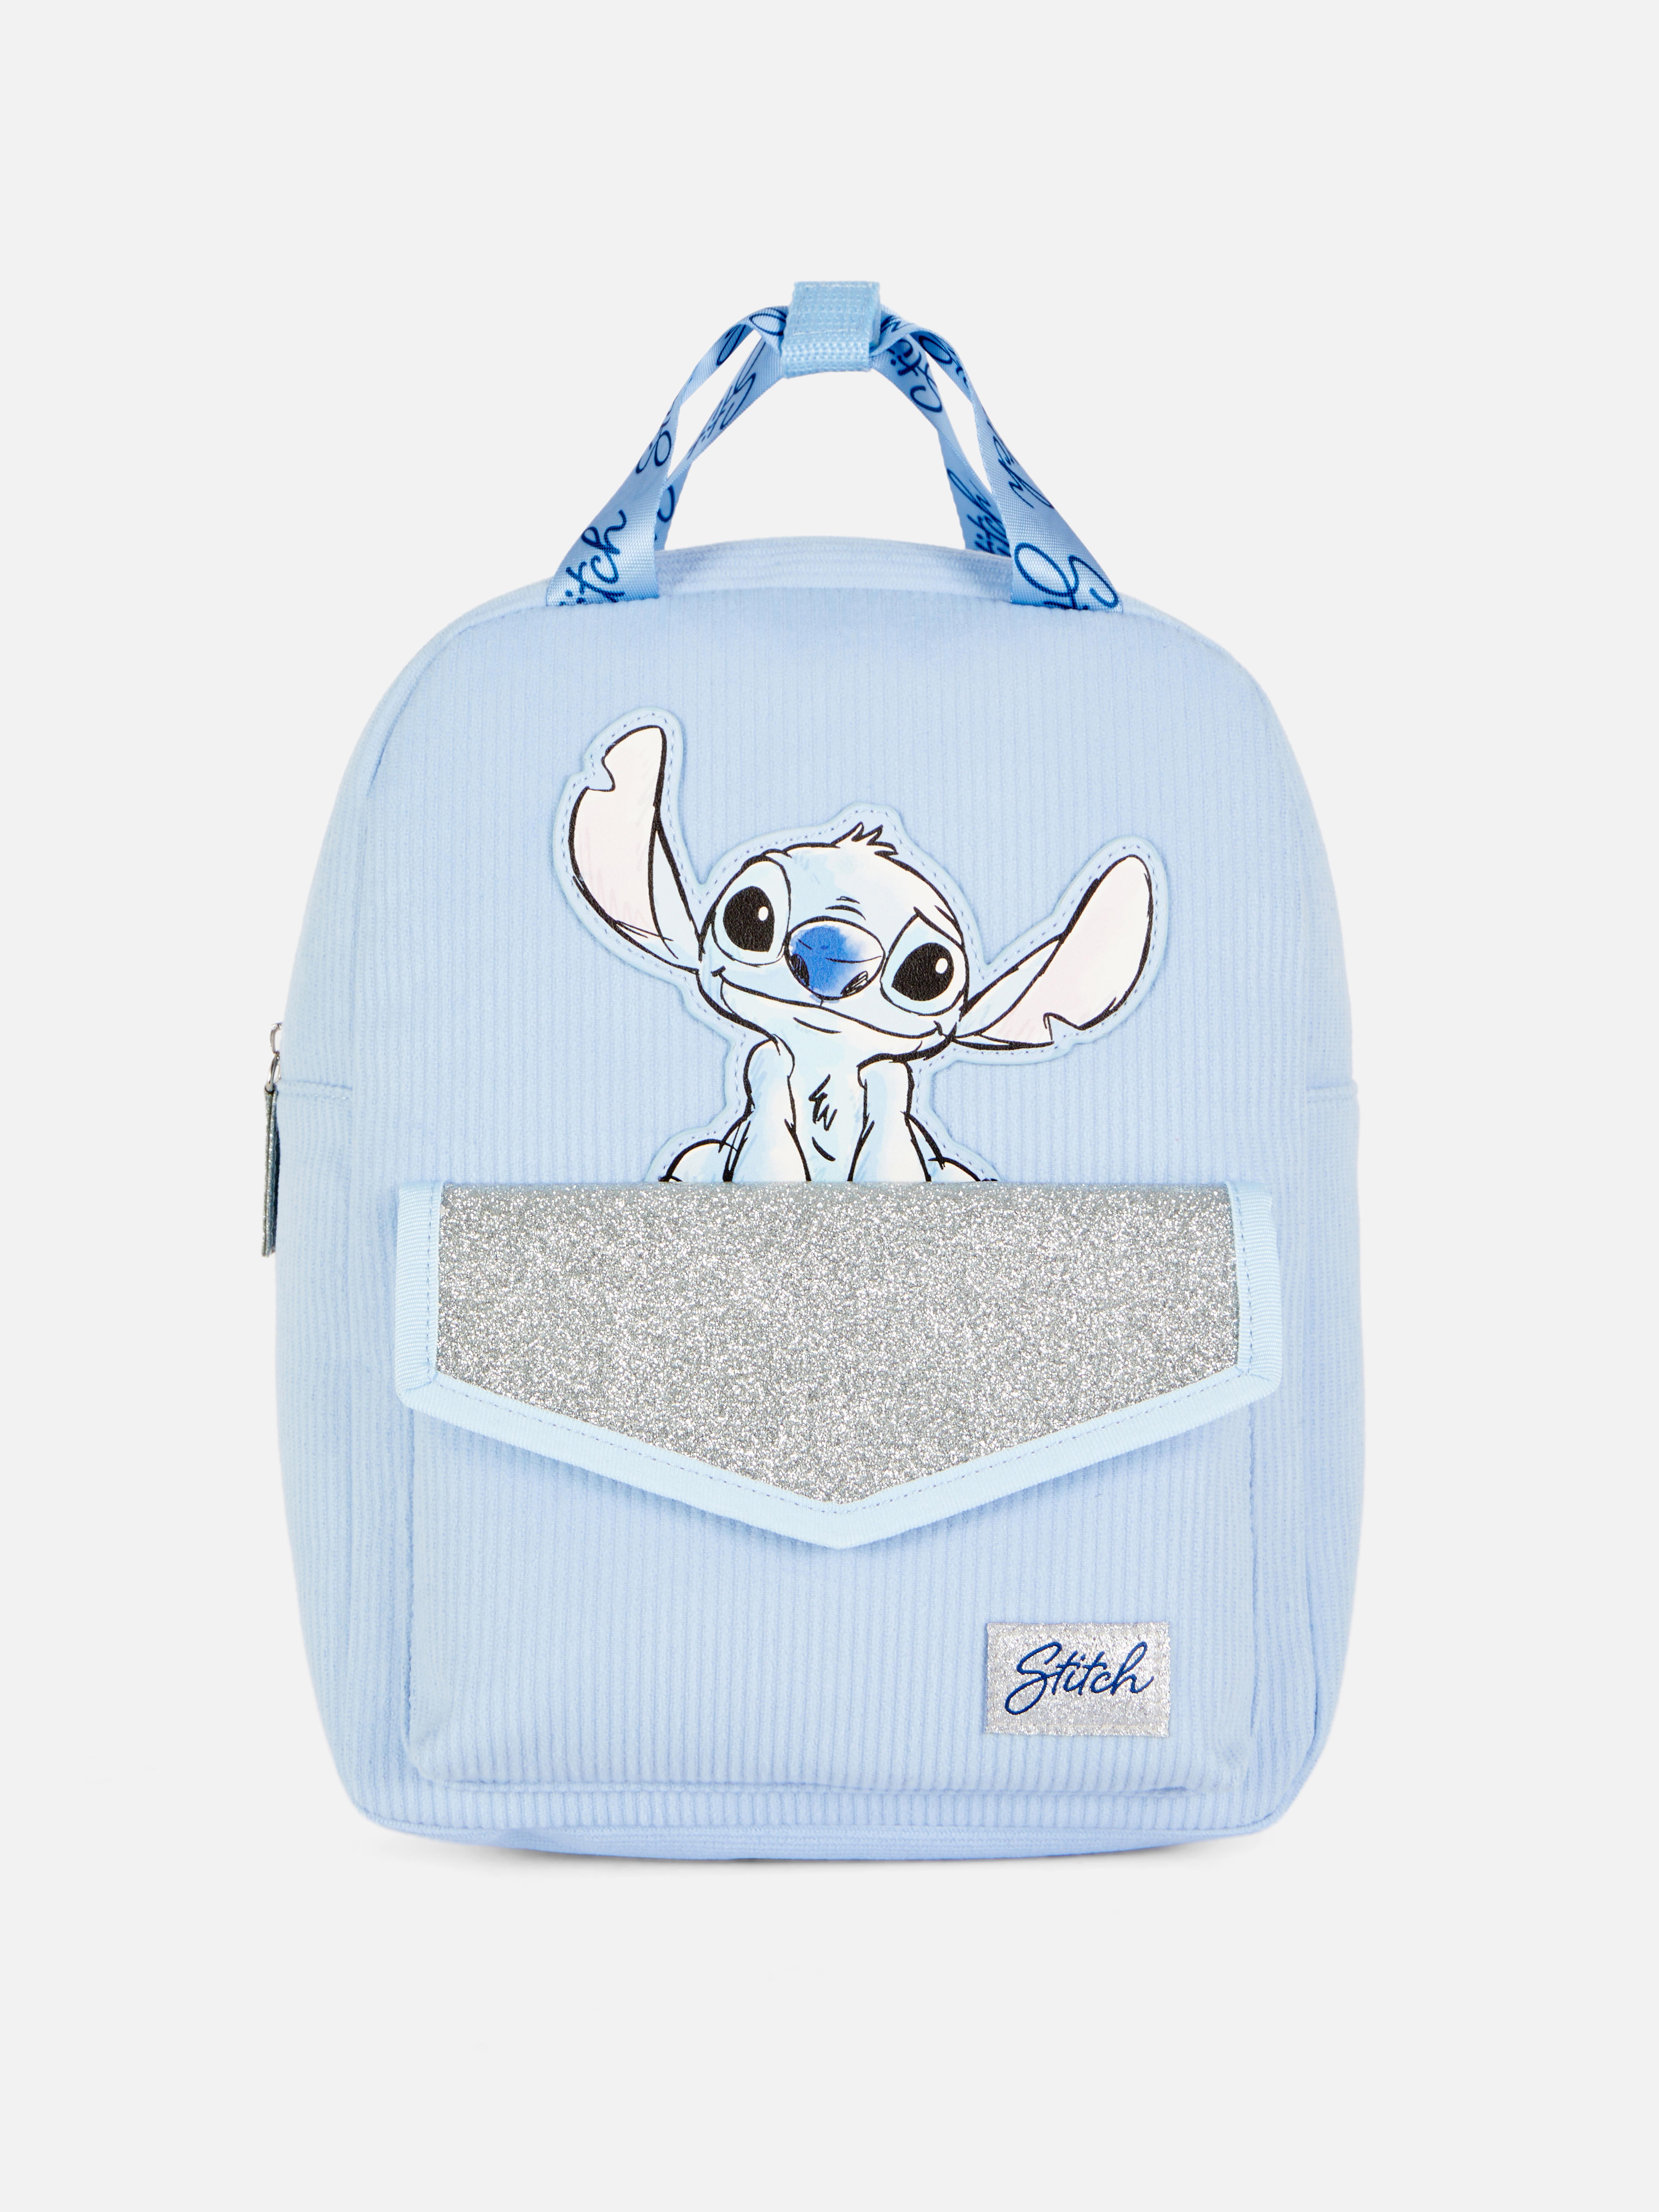 Disney’s Lilo and Stitch Corduroy Backpack